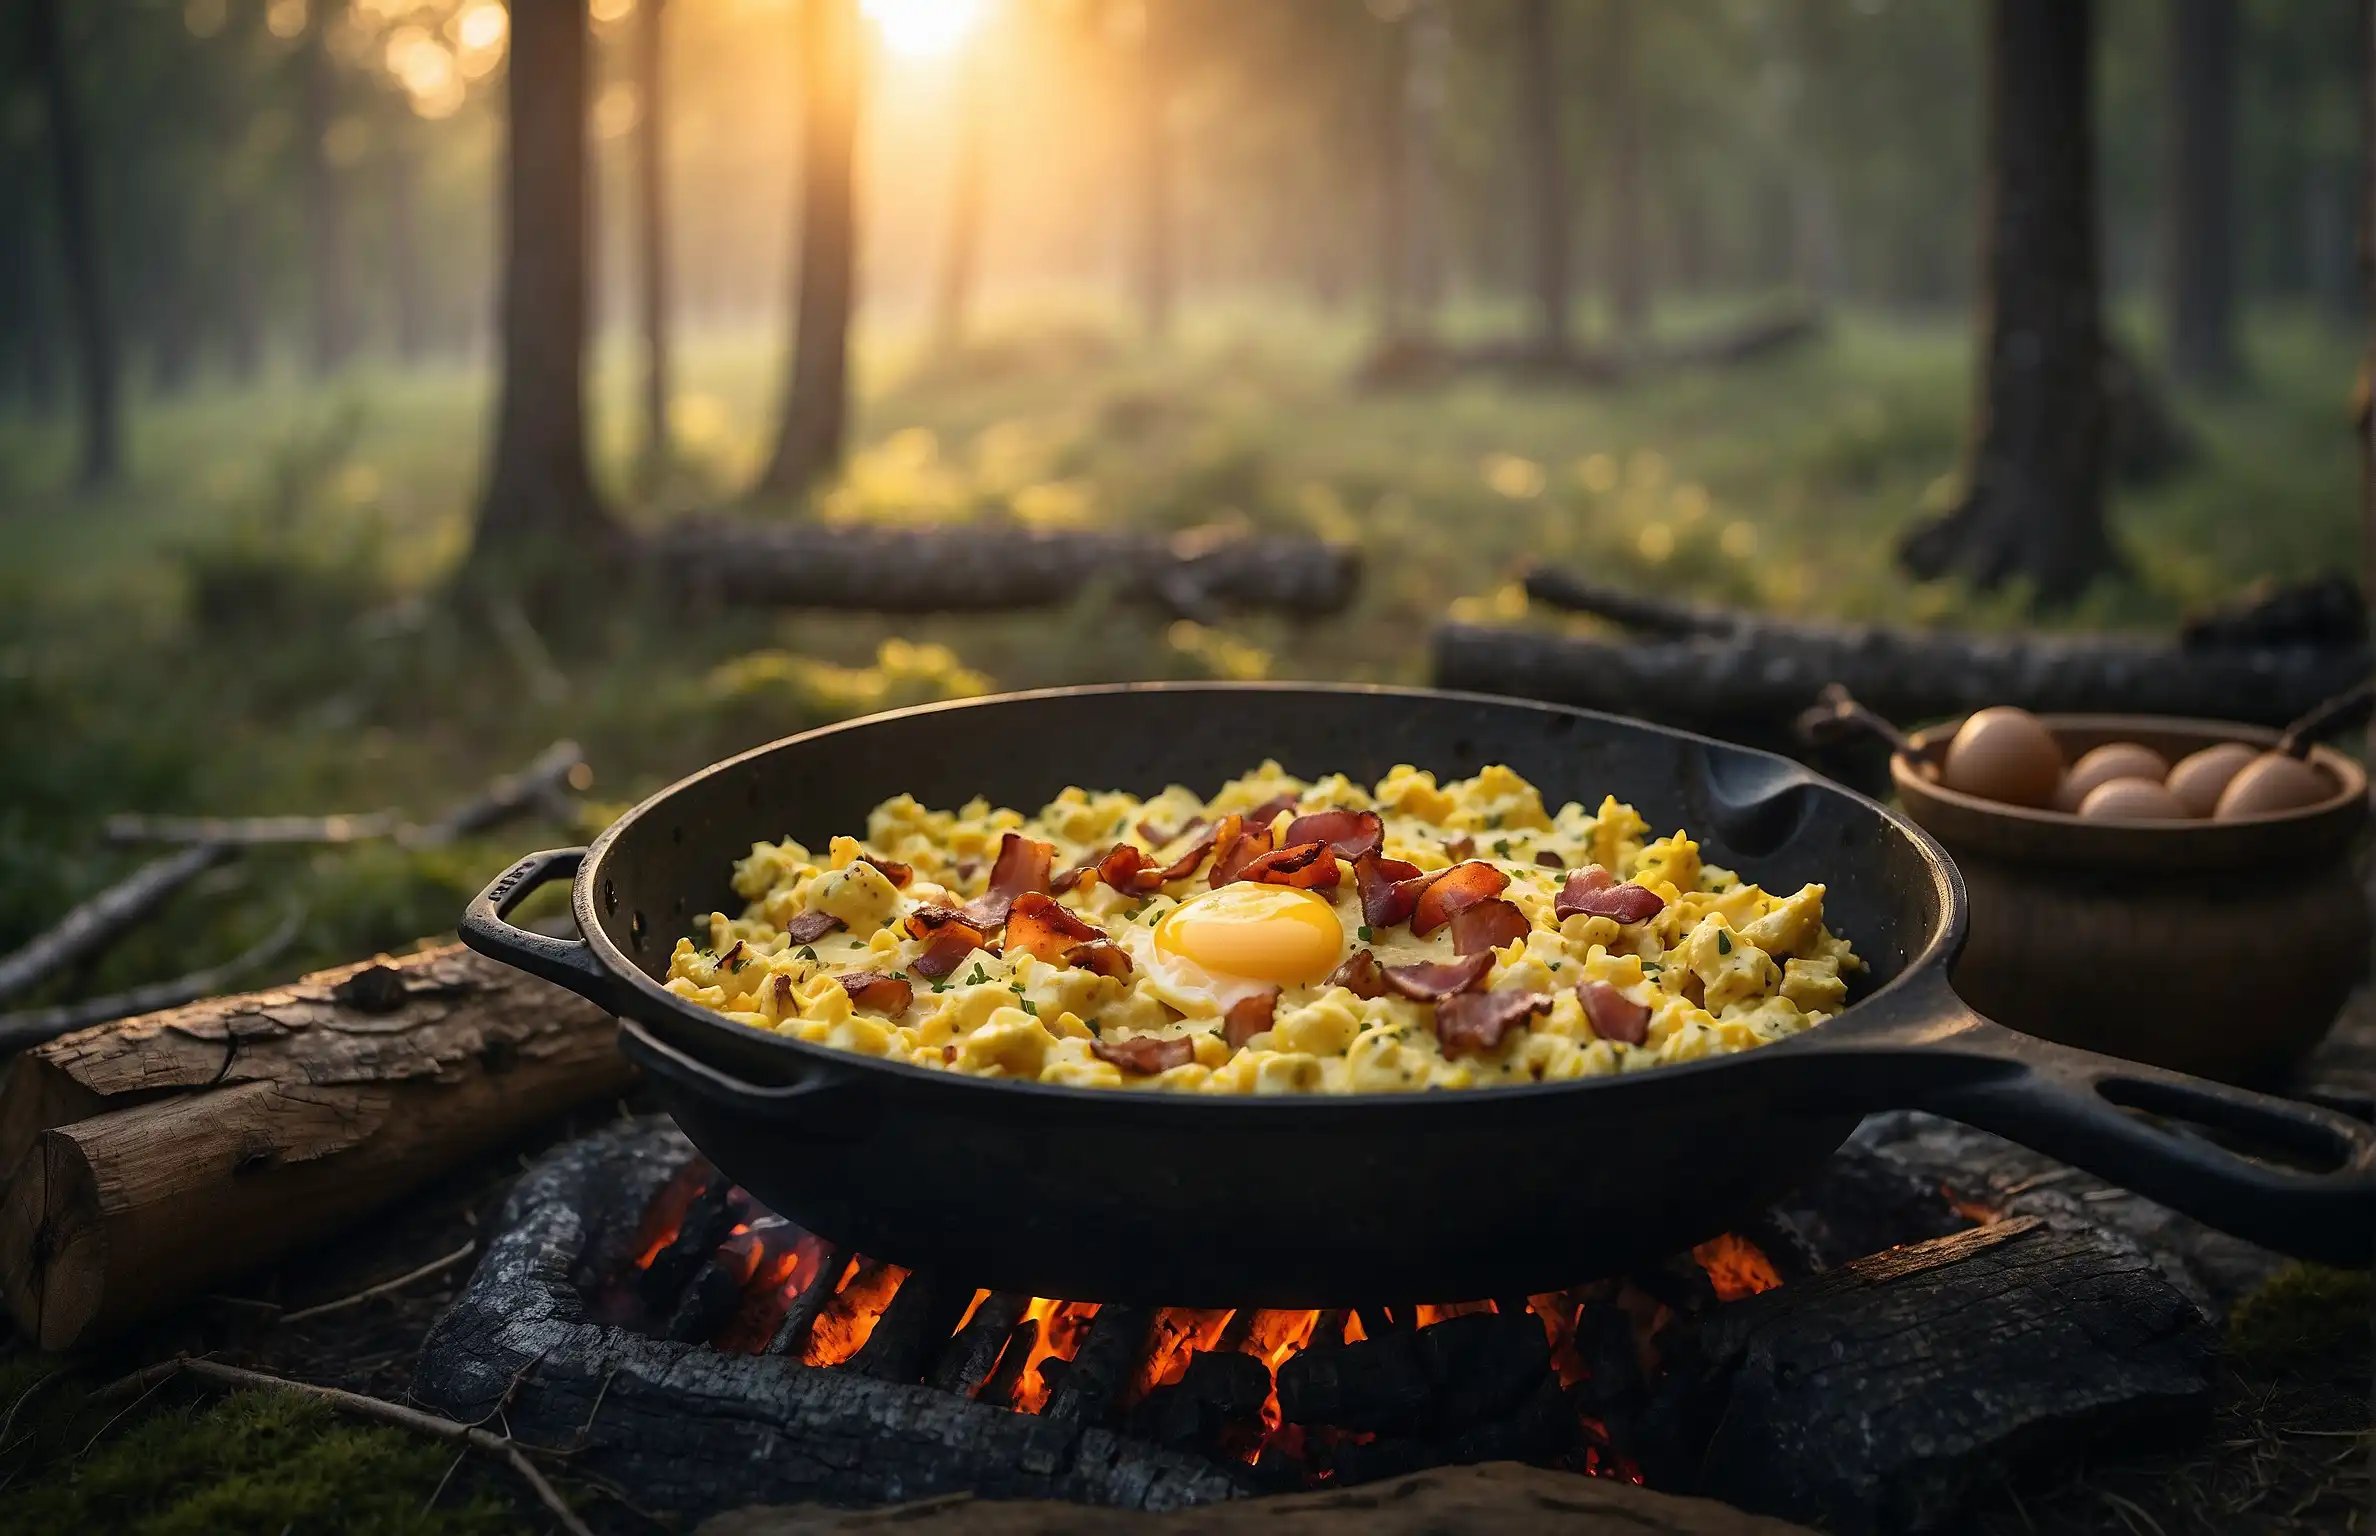 Best Food to Bring for Camping